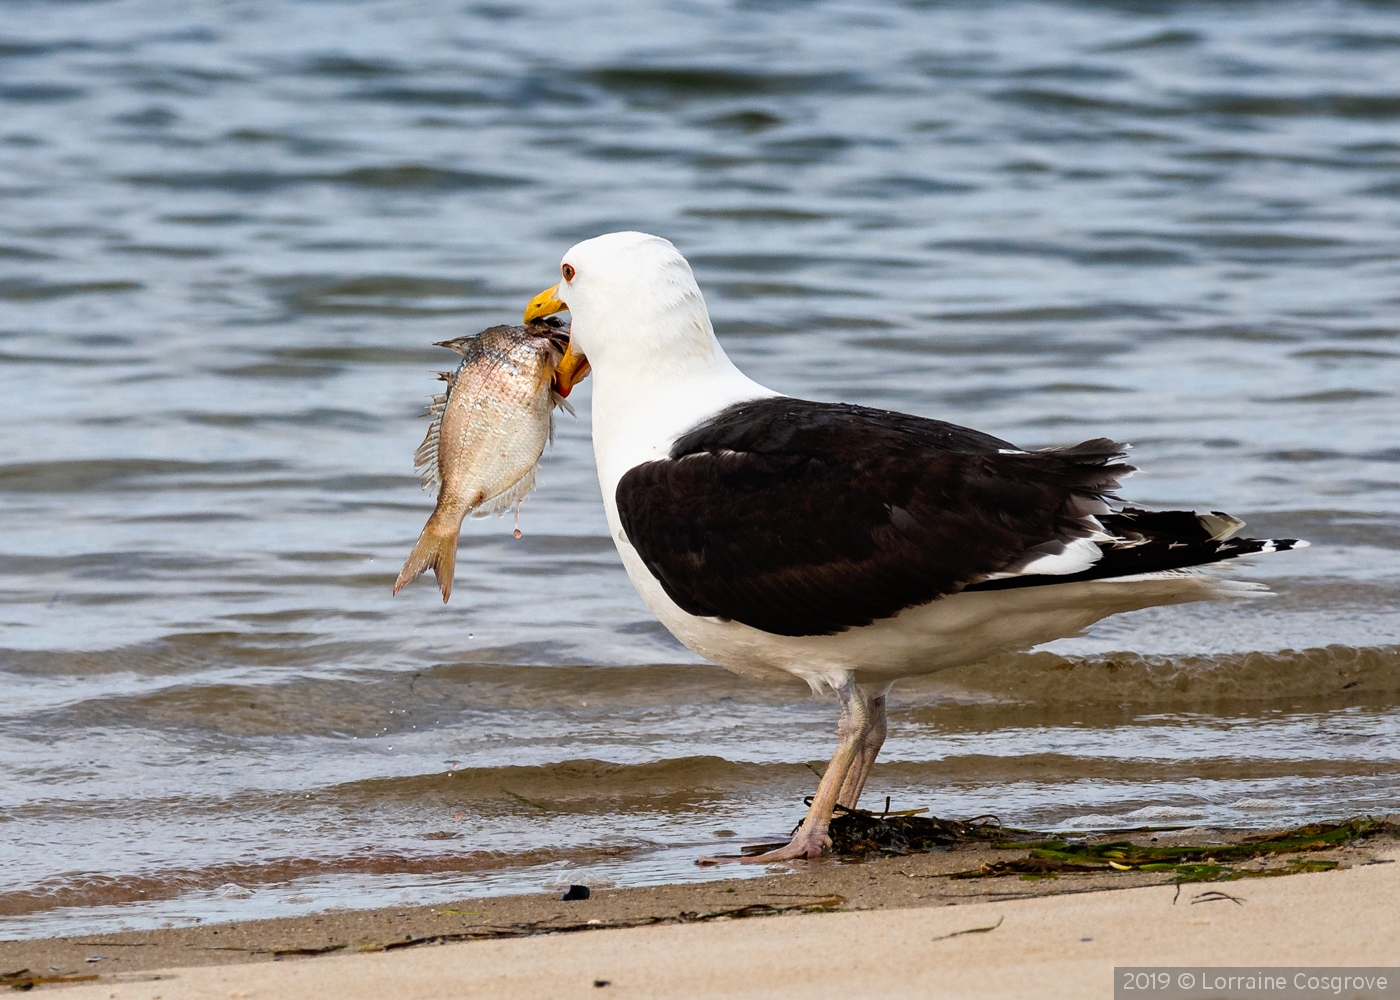 BLACK TAILED GULL WITH FISH by Lorraine Cosgrove